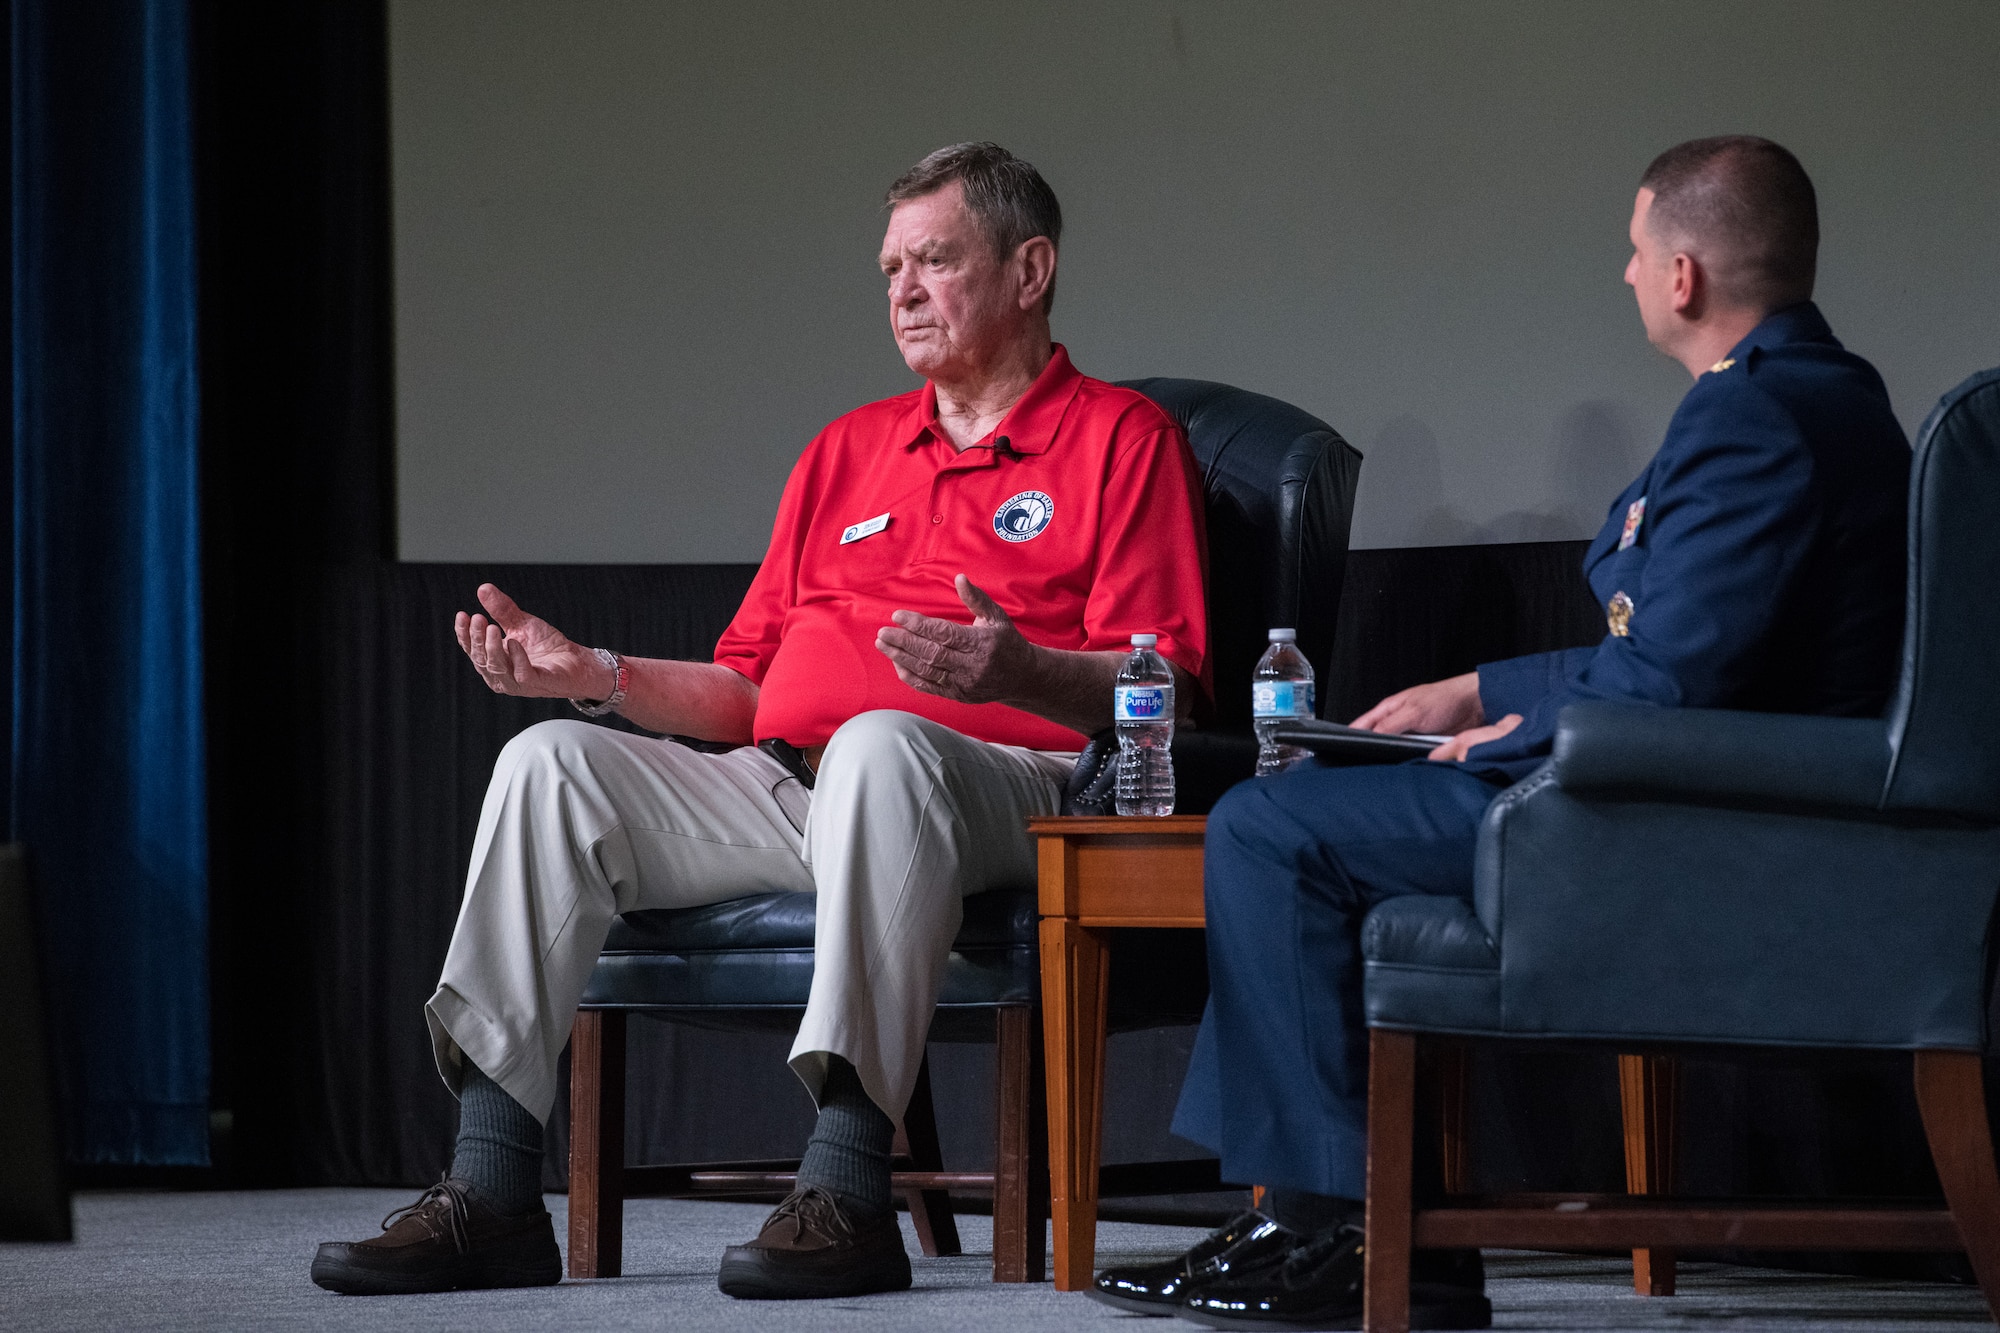 Retired Chief Master Sgt. Don A. Beasley speaks with Air Command and Staff College students, May 29, 2019, during the 38th annual Gathering of Eagles at Maxwell Air Force Base, Alabama. Beasley was selected as an Eagle for his innovative contributions to the pararescue community while developing and executing some of the most daring rescues in history, specifically Desert One.